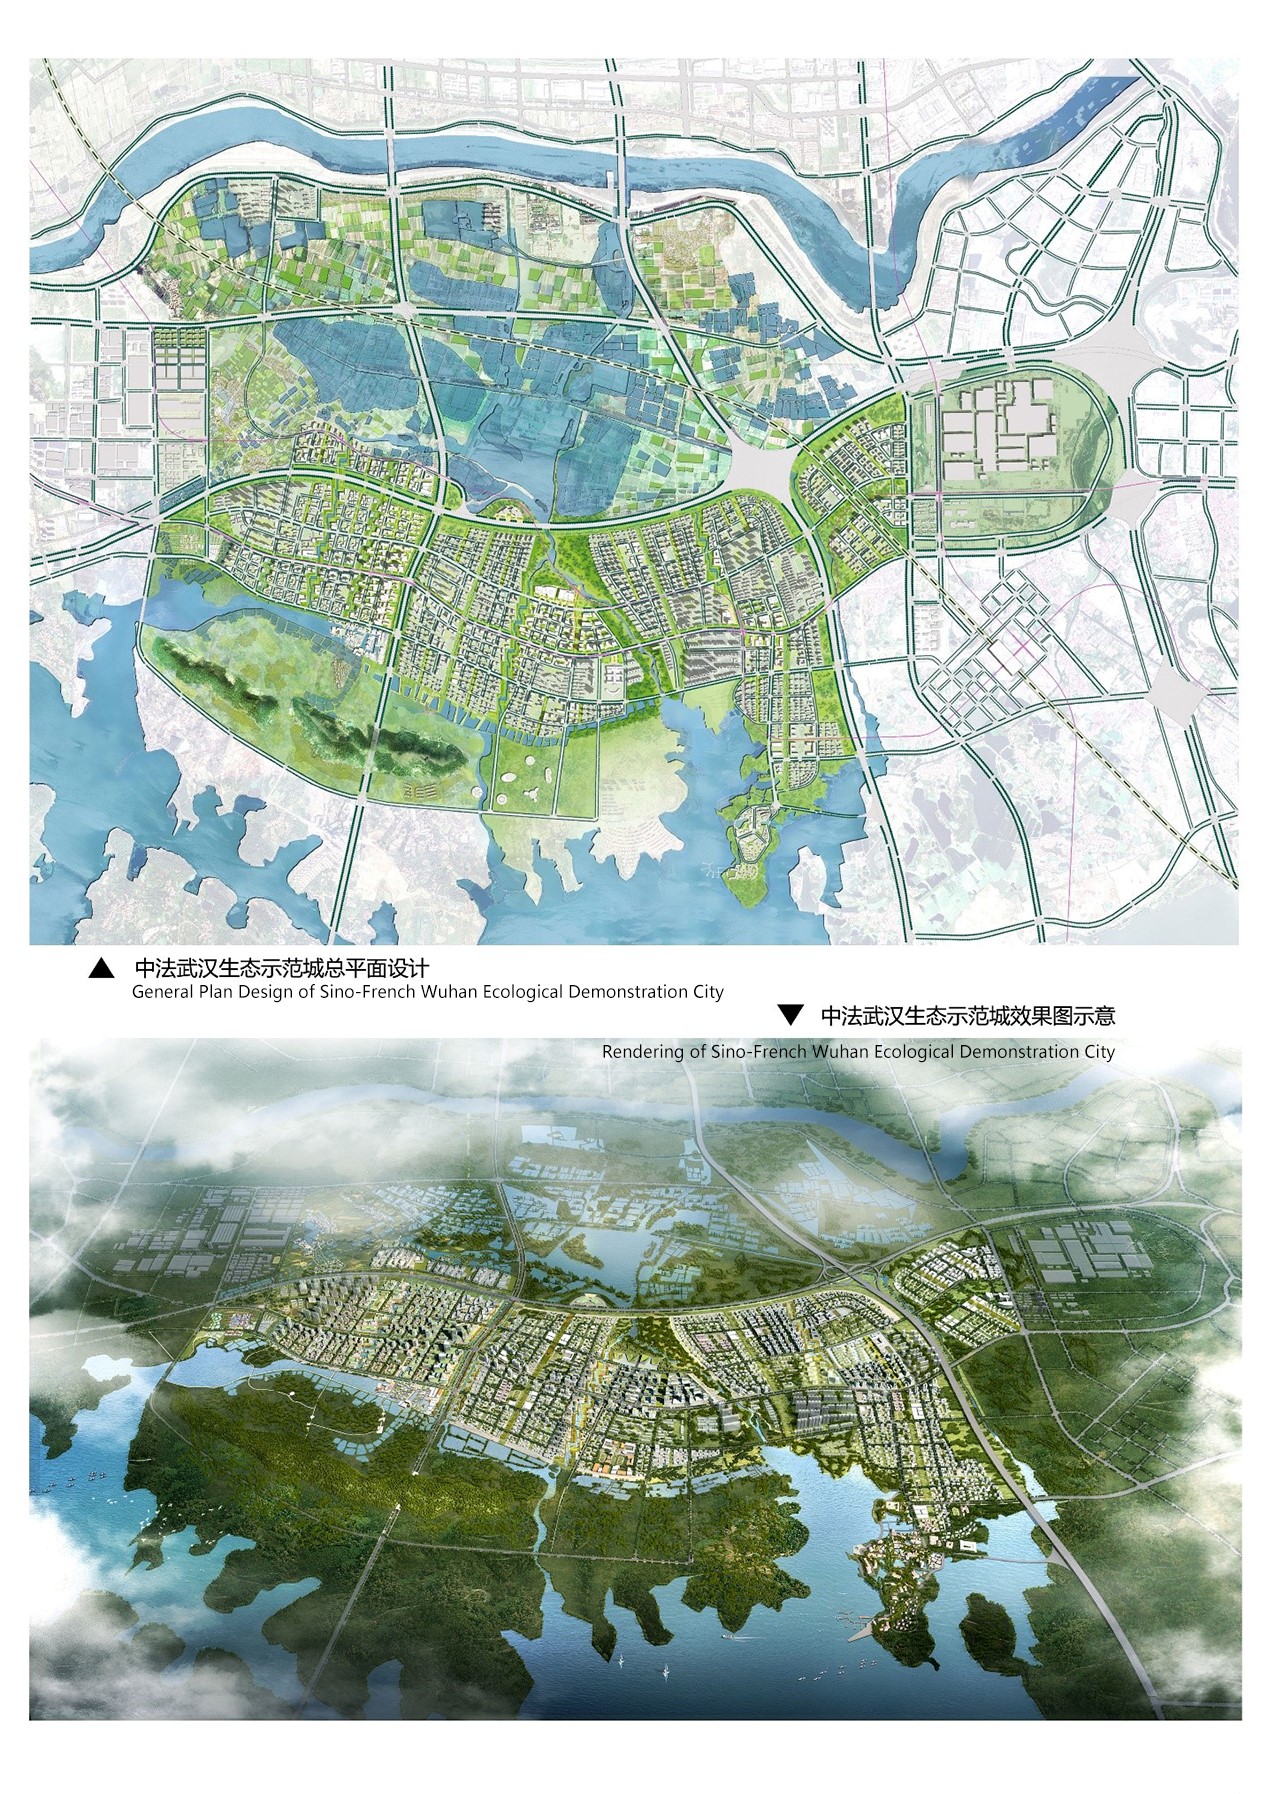 Sustainable Development Practice of Sino-French Cooperation in Coping with Climate Change--Master Plan of Sino-French Wuhan Ecological Demonstration City